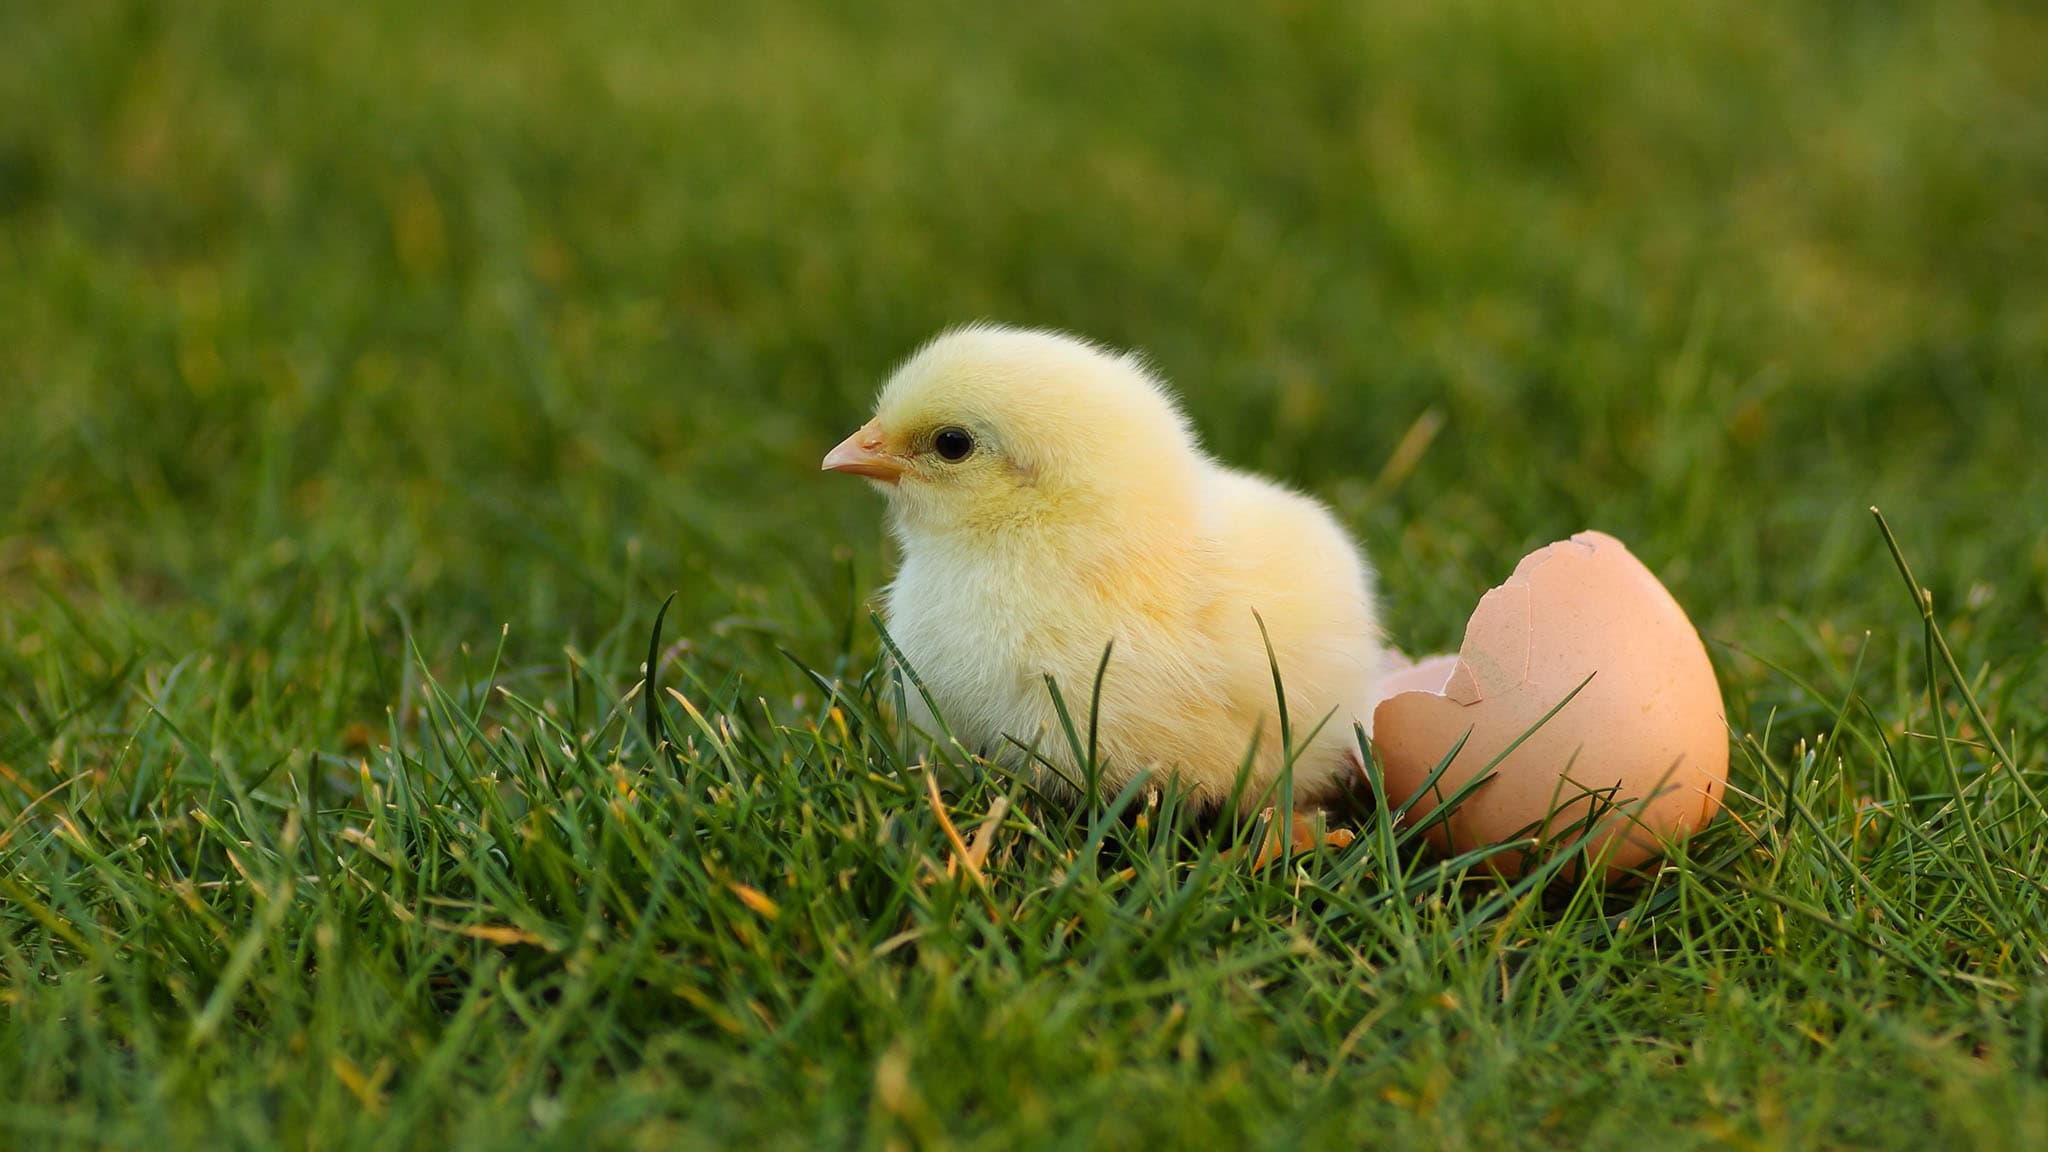 Photograph Of Fluffy Baby Chick Stepping Away From One Half Of A Broken Eggshell